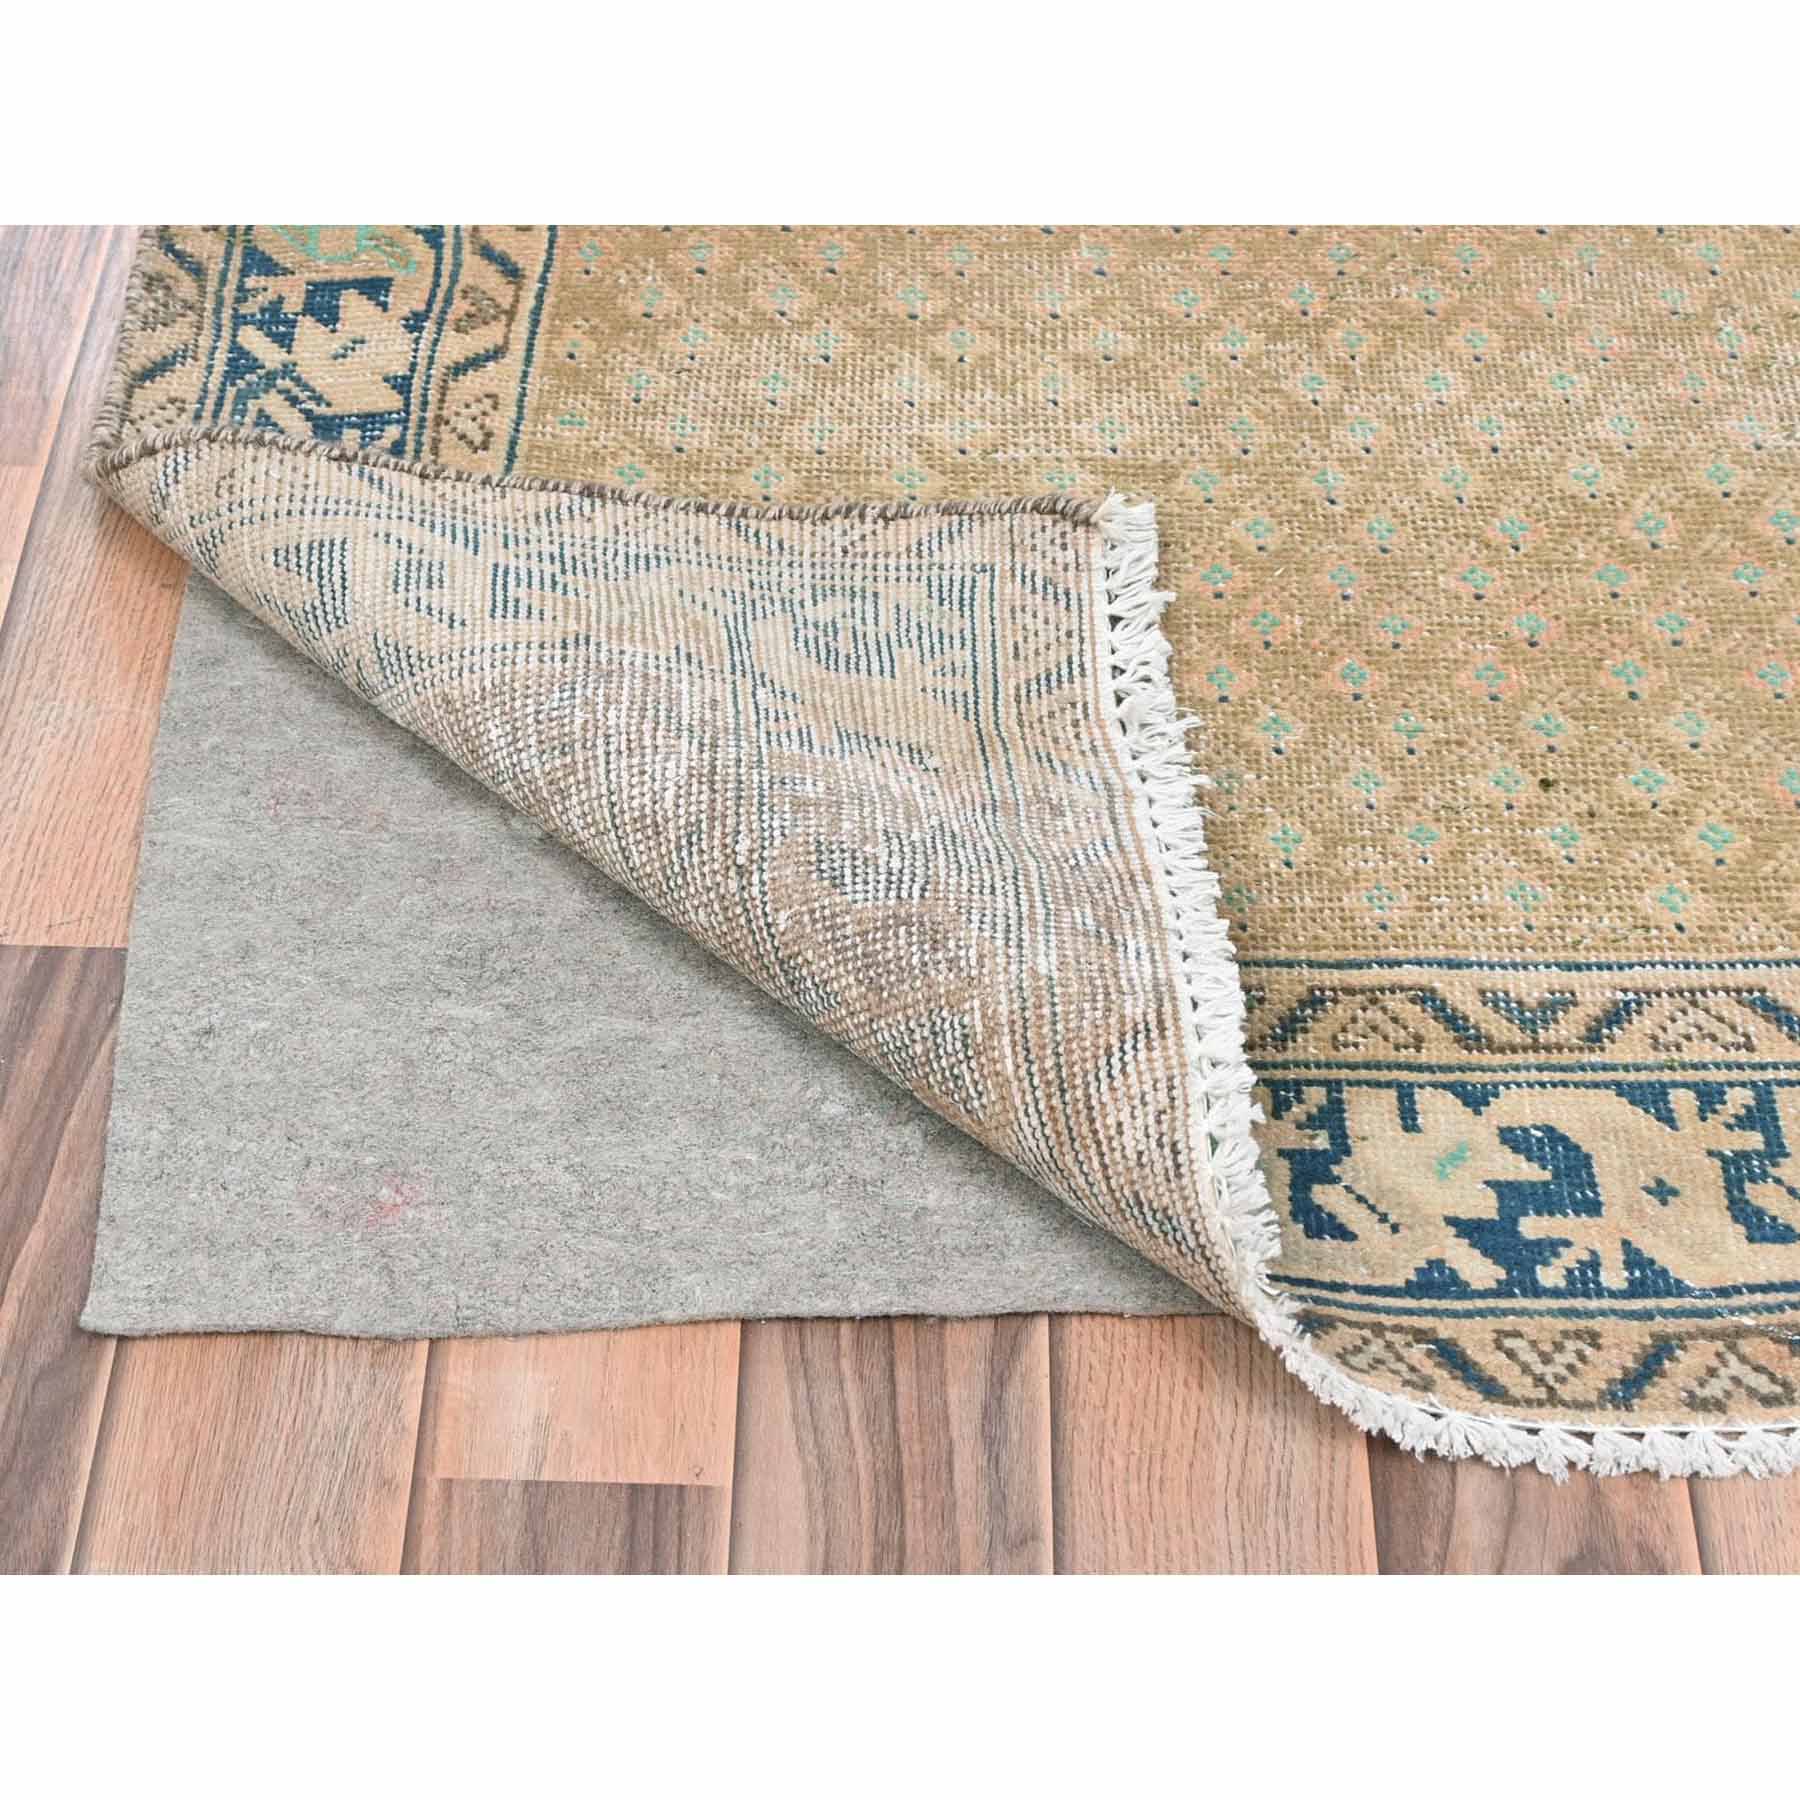 Overdyed-Vintage-Hand-Knotted-Rug-409485